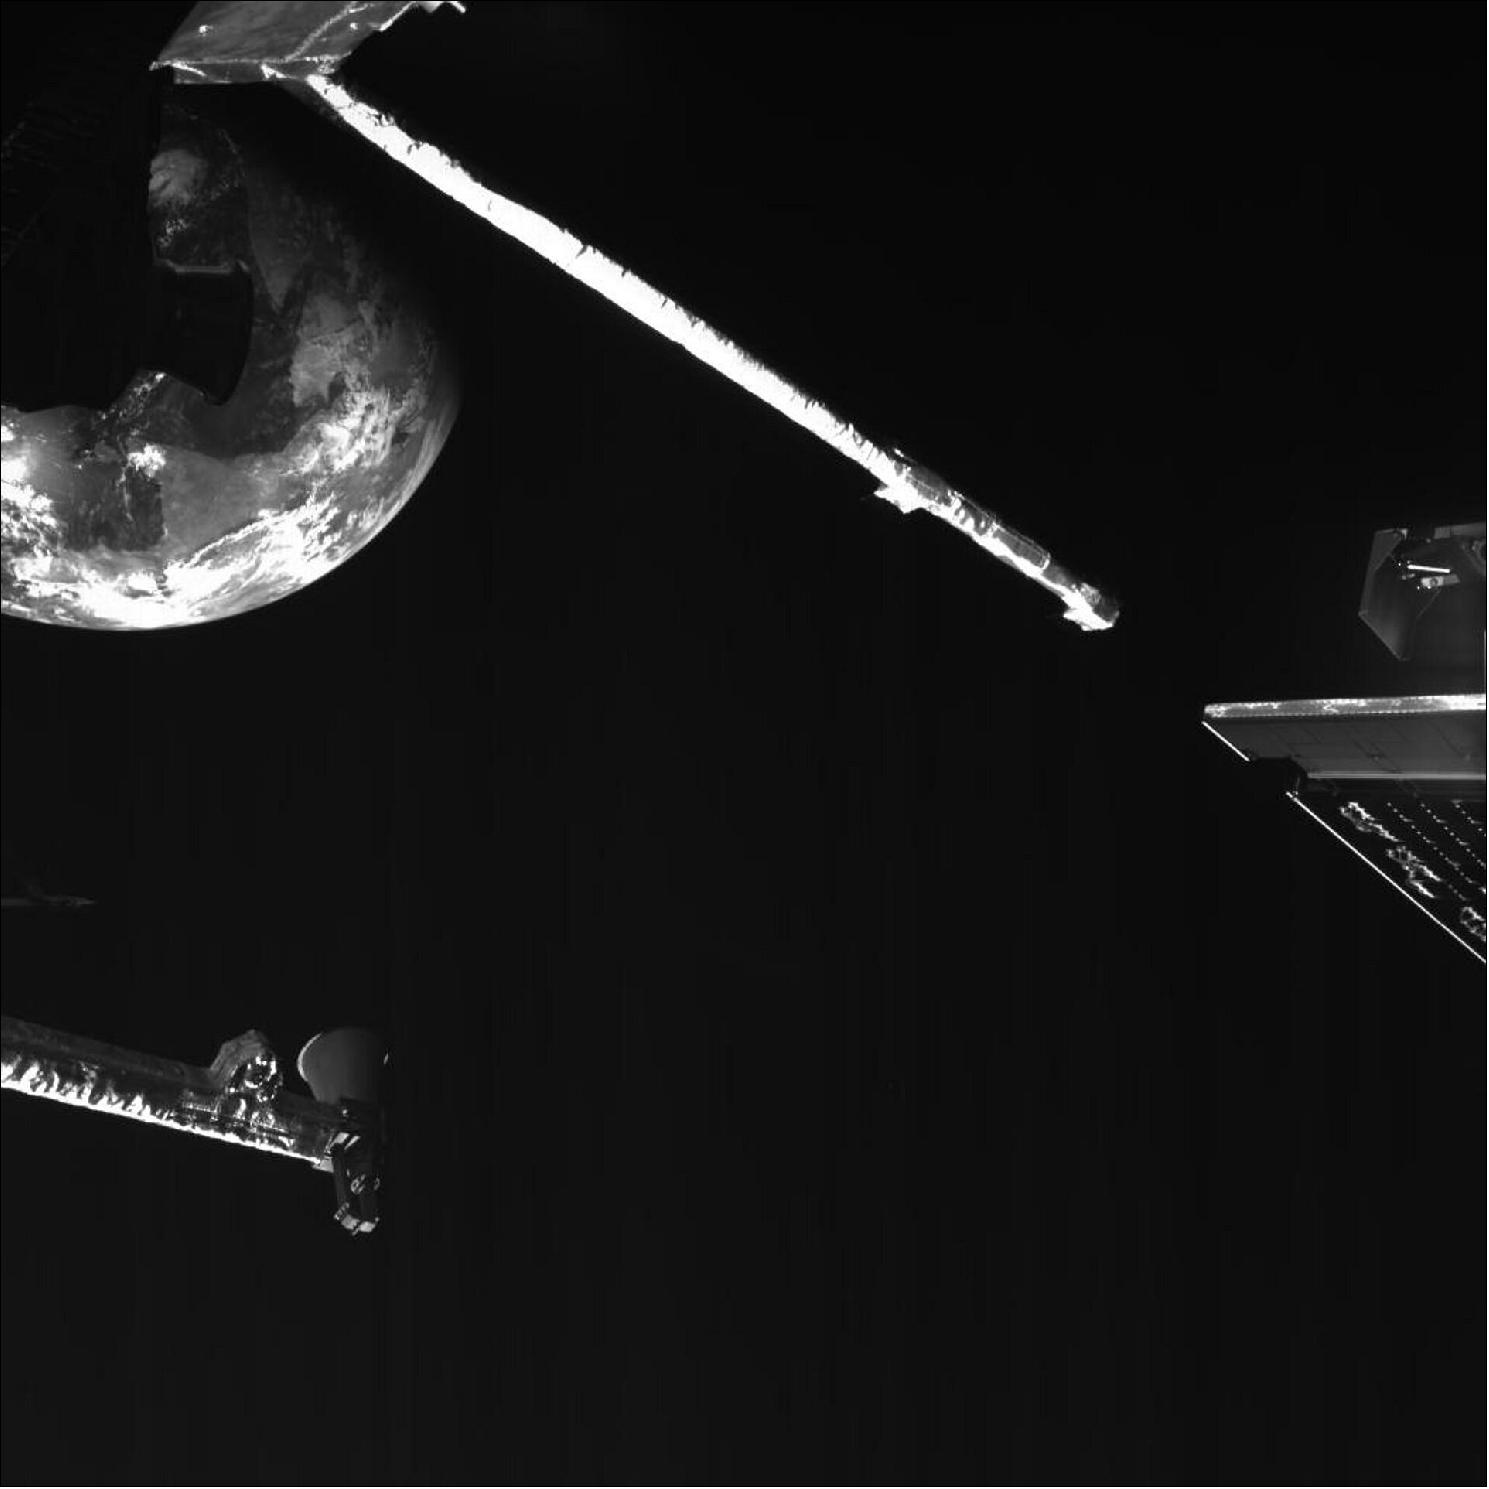 Figure 41: BepiColombo's close-up of Earth during flyby. A view of Earth captured by one of the MCAM selfie cameras on board of the European-Japanese Mercury mission BepiColombo, as the spacecraft zoomed past the planet during its first and only Earth flyby. The image was taken at 03:33 UTC on 10 April 2020, shortly before the closest approach, from around 19,000 km away (image credit: ESA/BepiColombo/MTM, CC BY-SA 3.0 IGO)